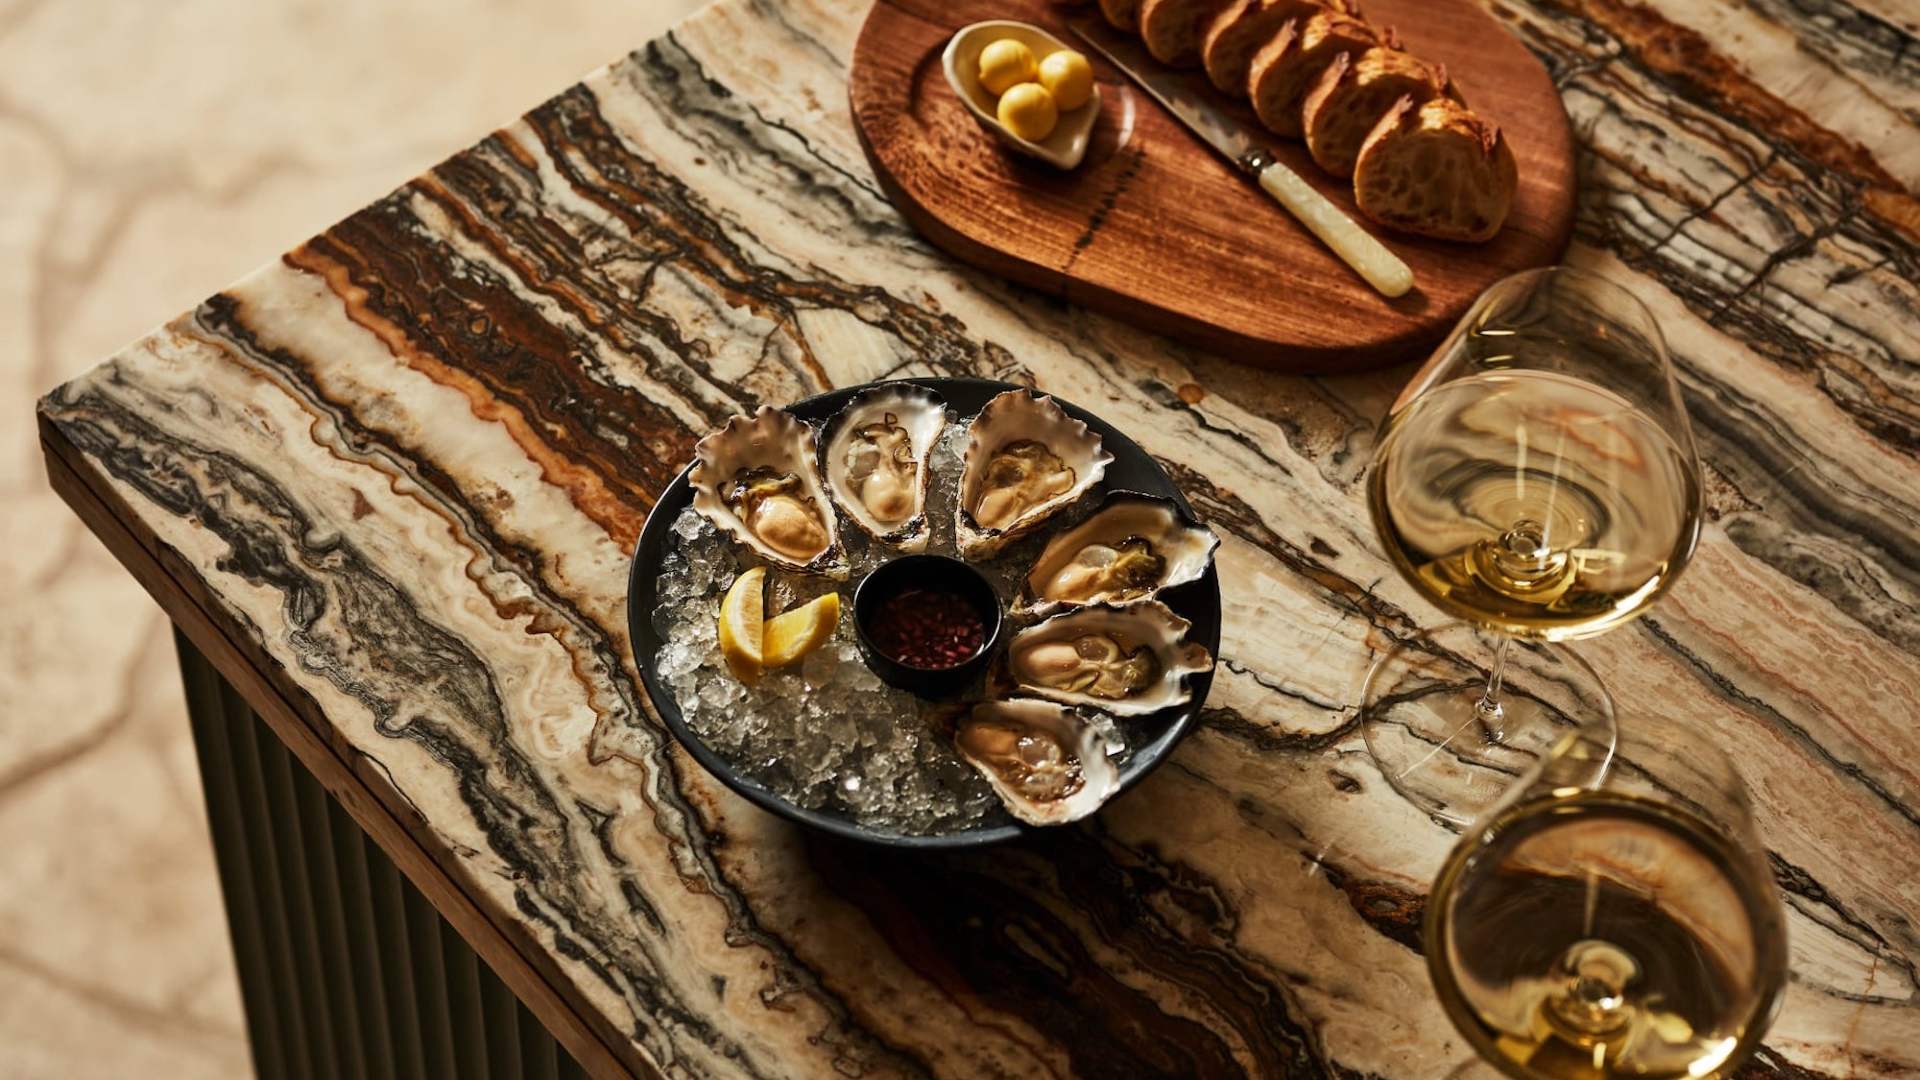 Pearl Chablis & Oyster Bar Is the Sophisticated New Spot Celebrating Bivalves and Fine French Wine